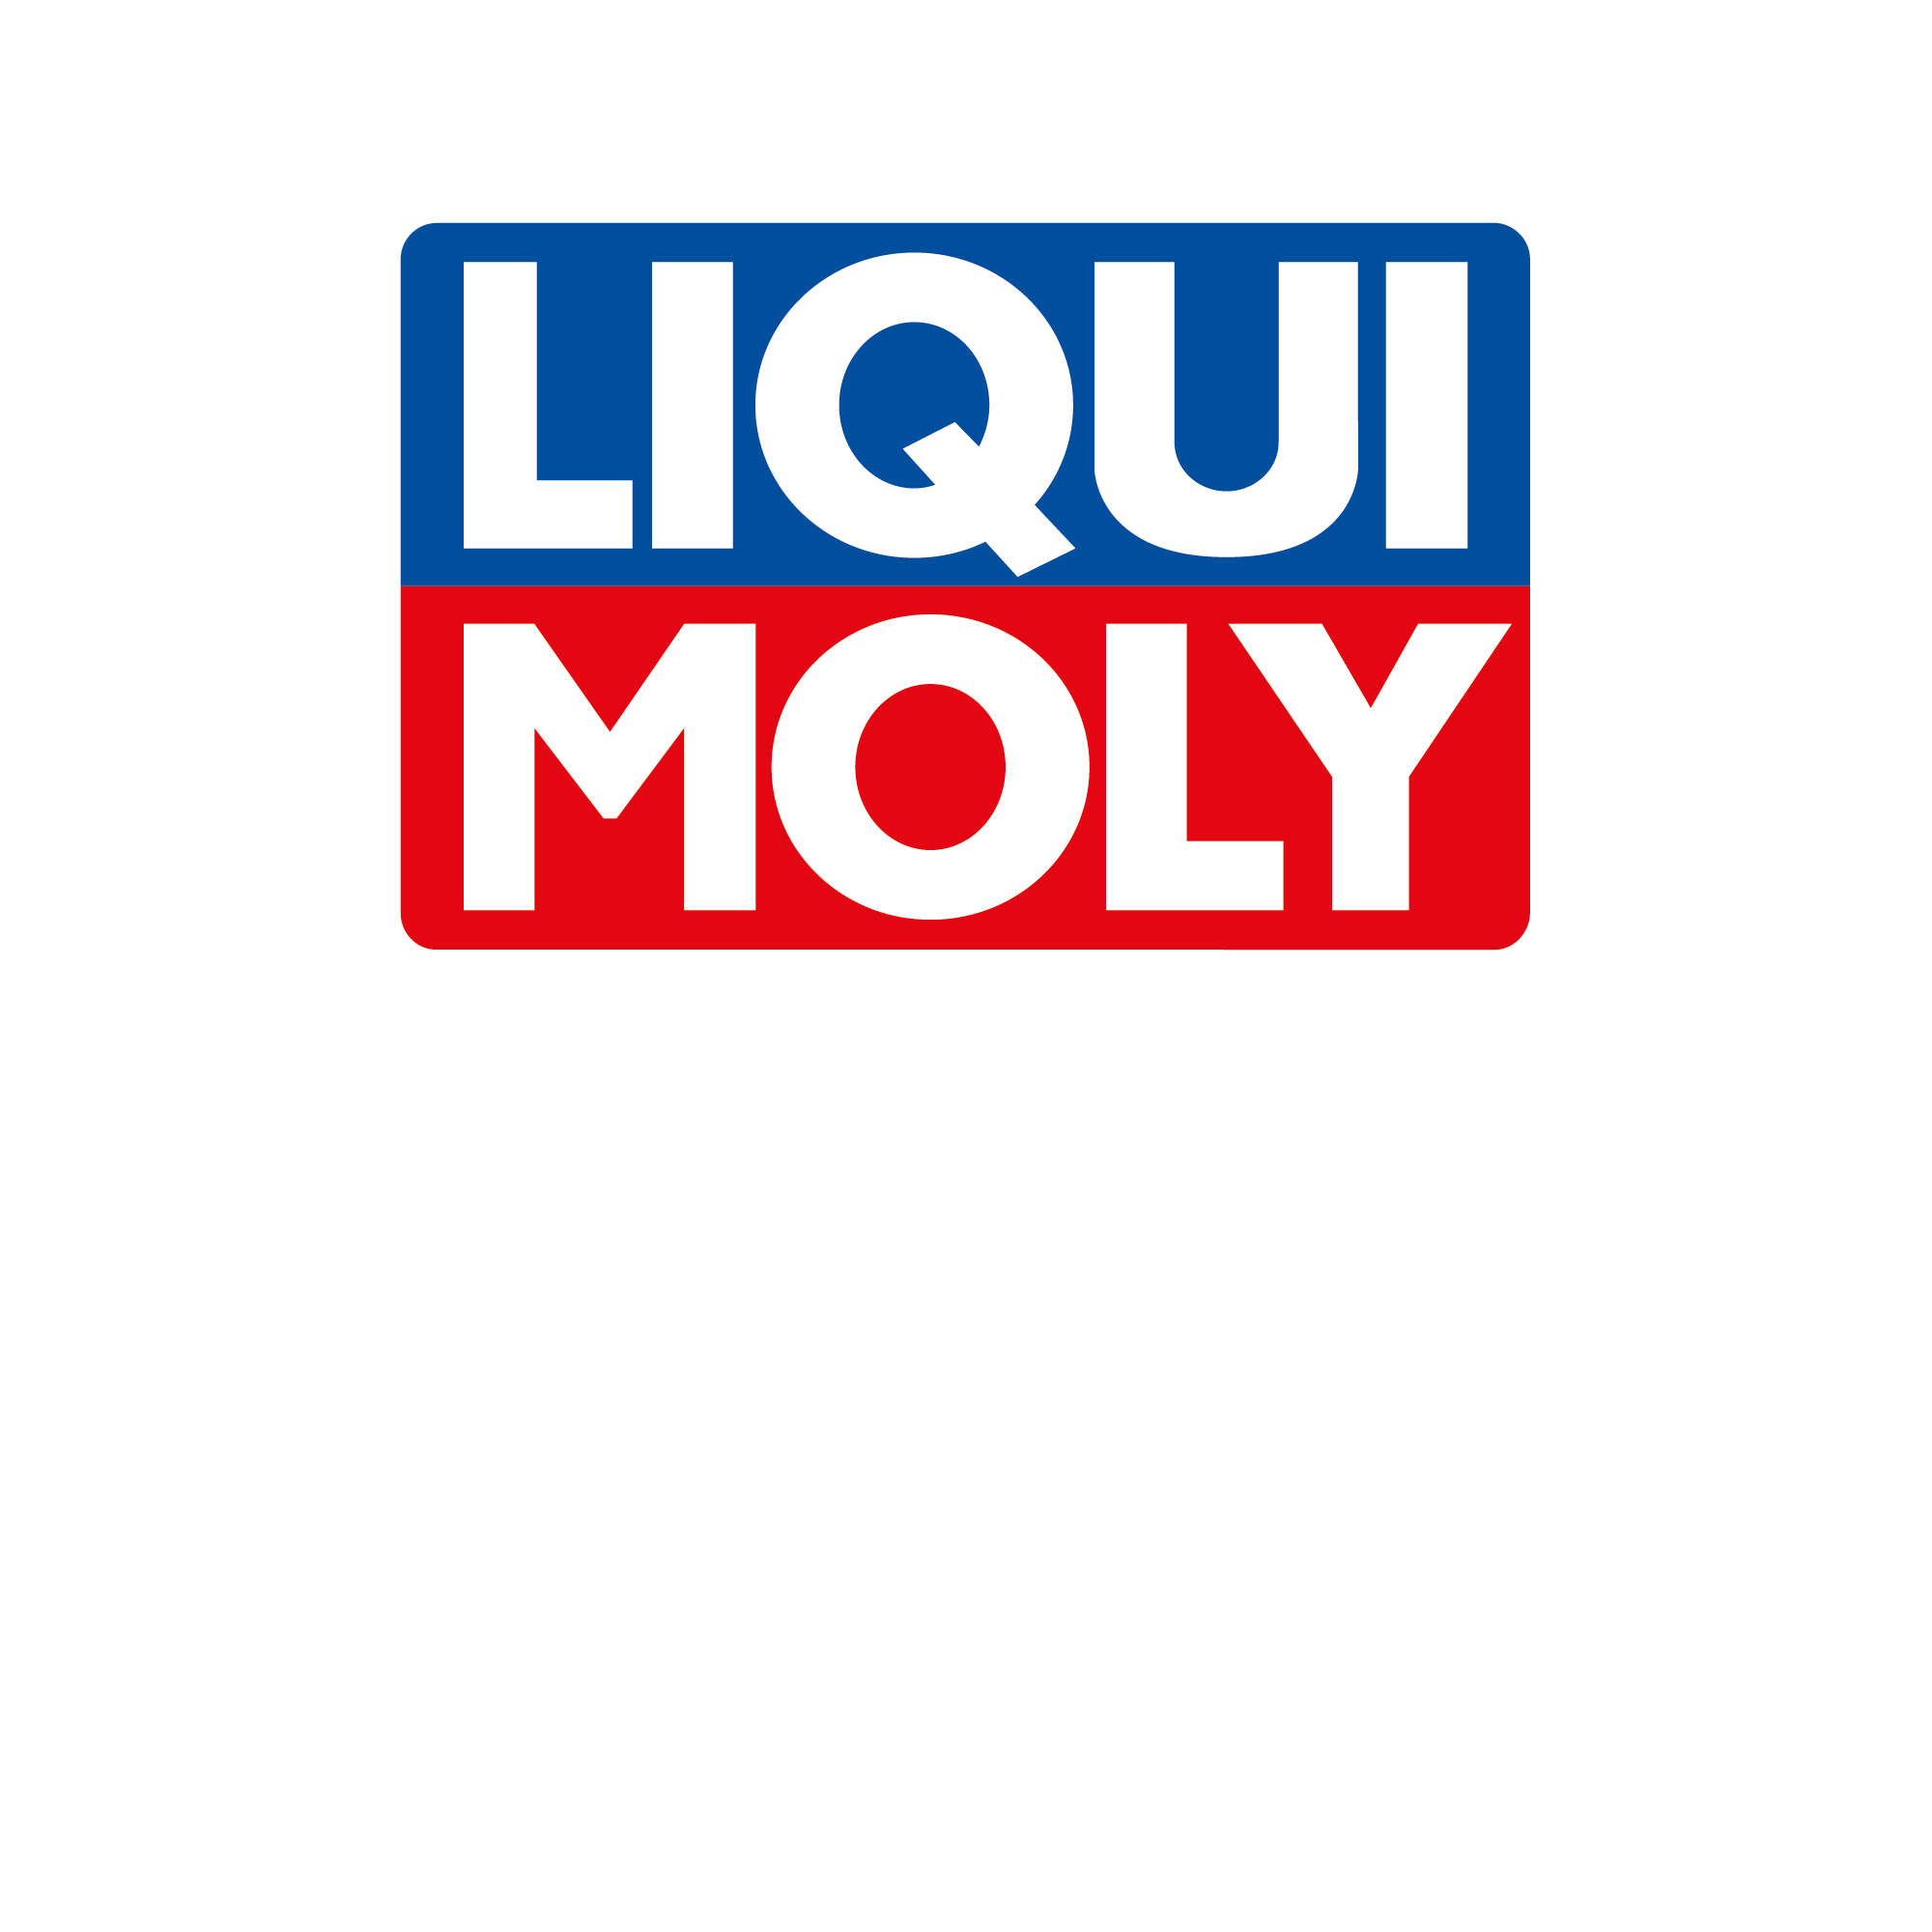 Safety Impexin  Buy Liqui Moly Oils And Lubricants Online